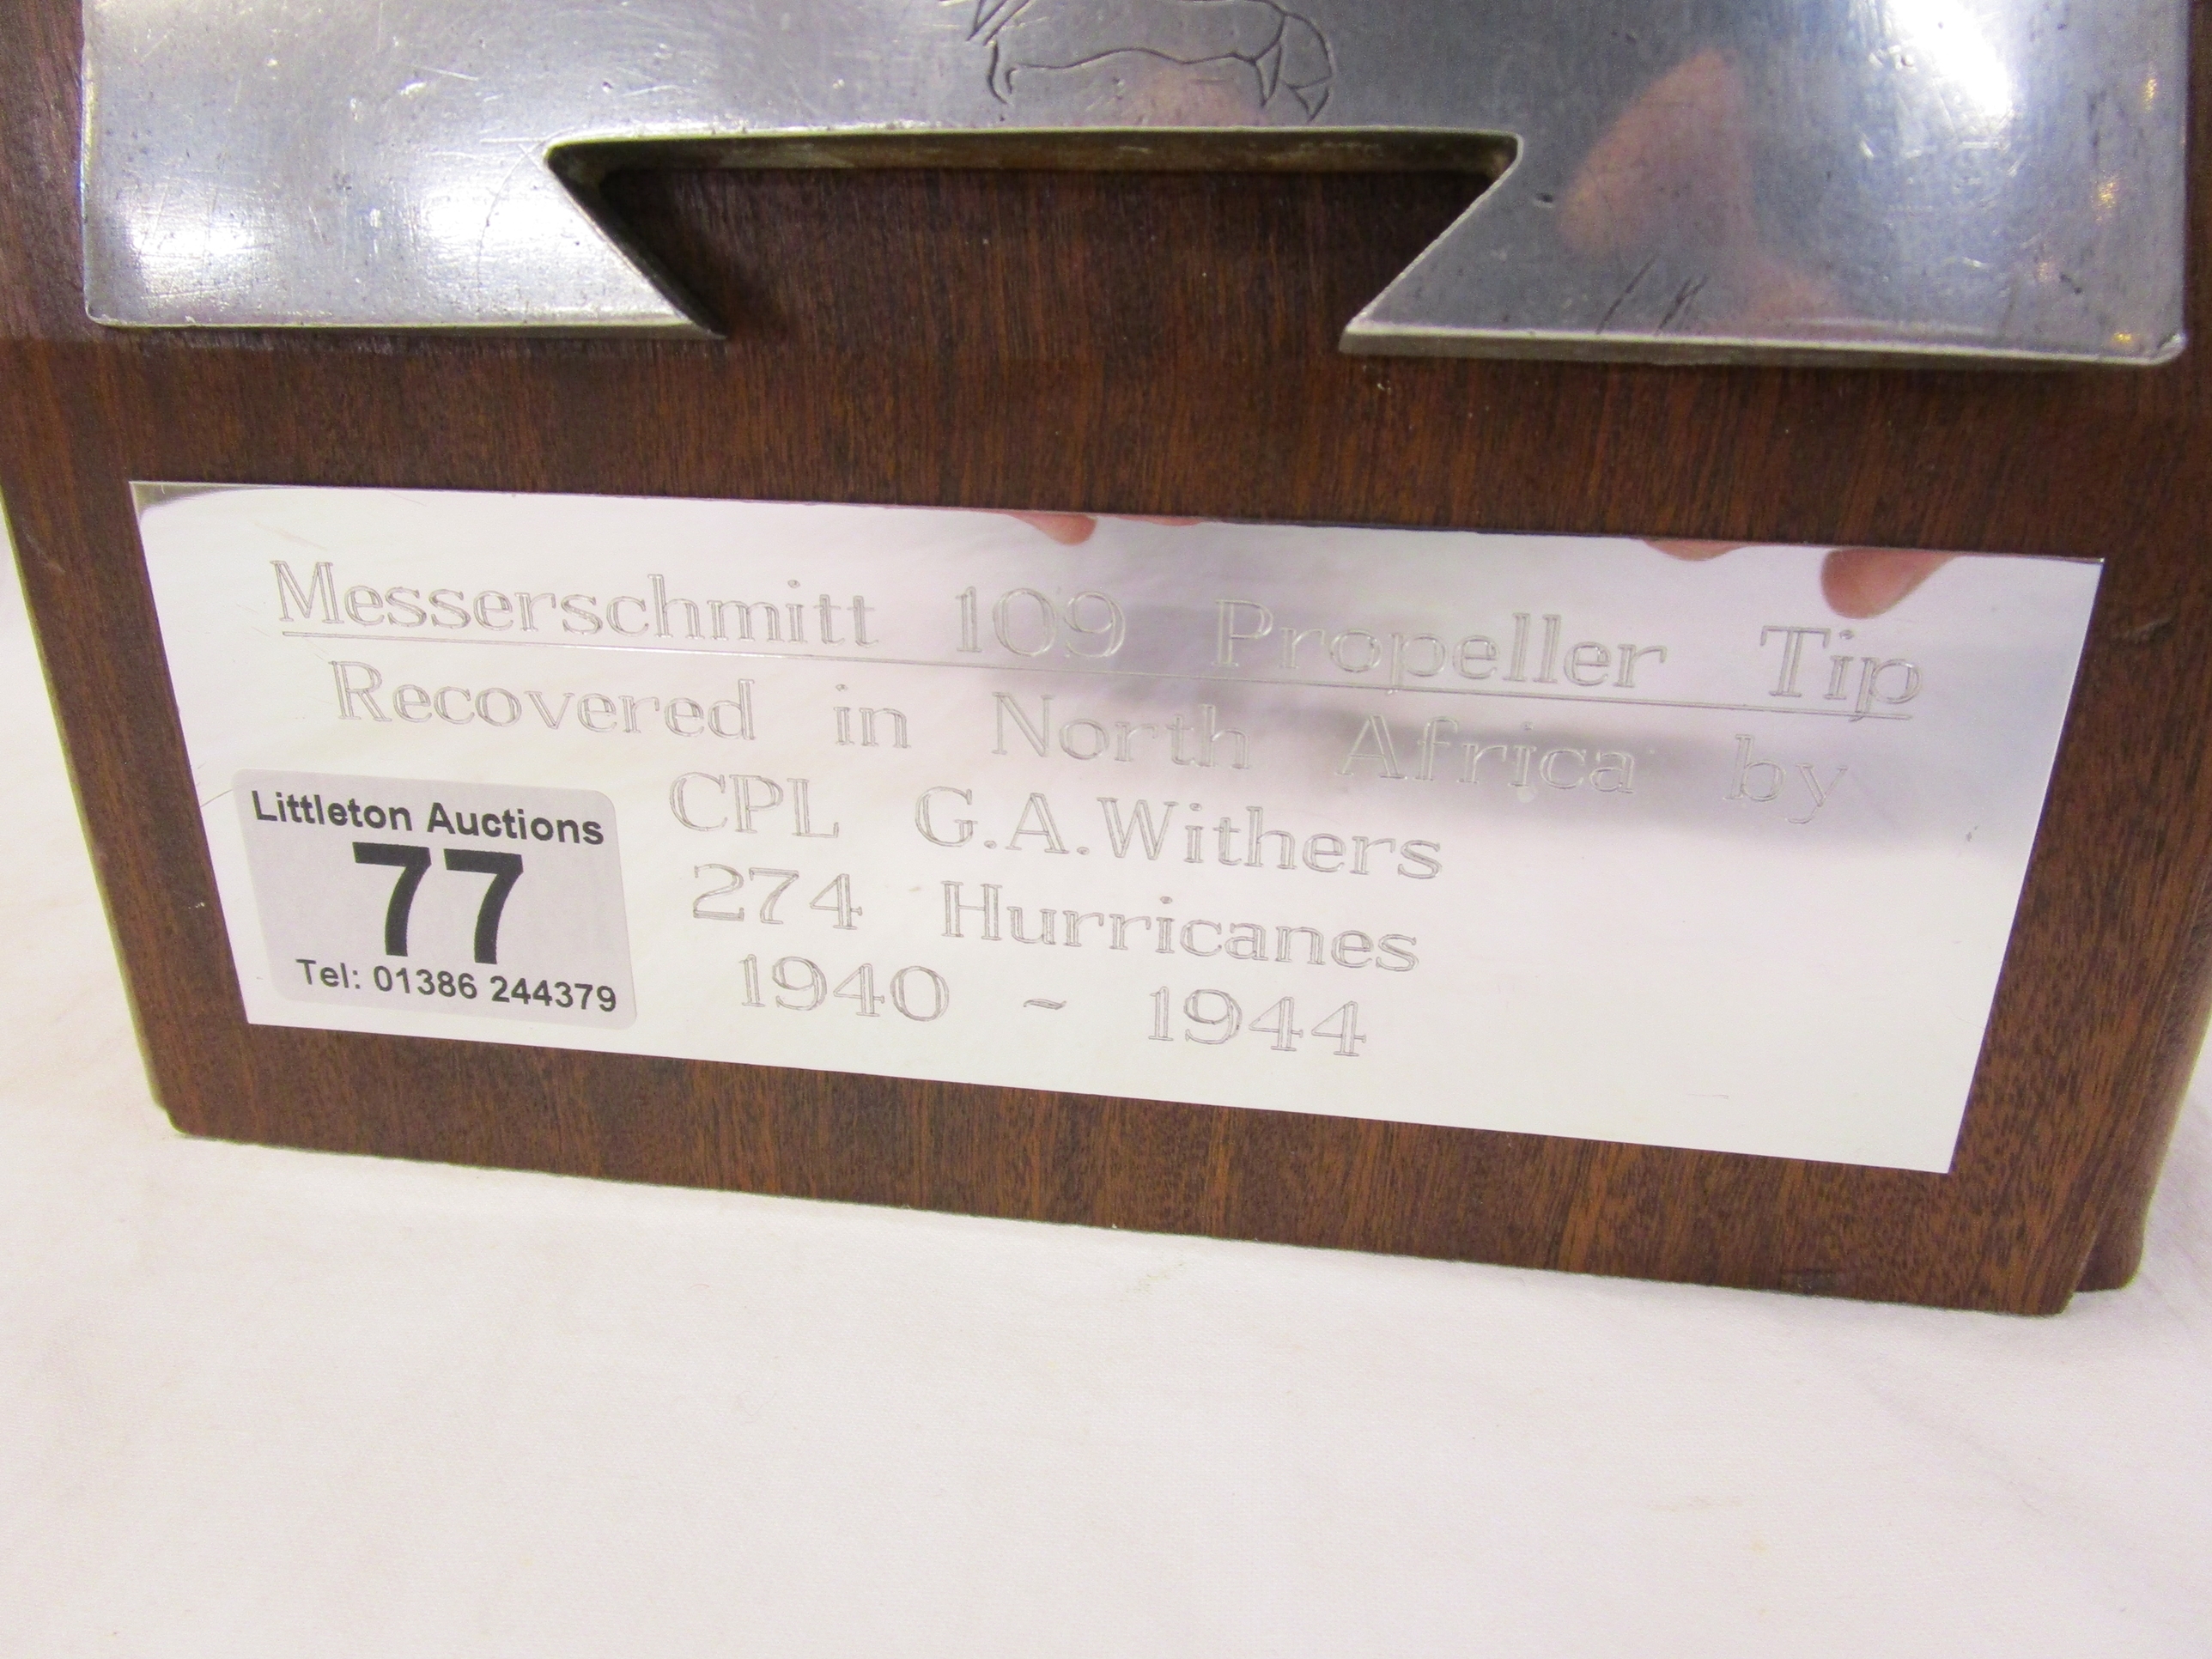 Messerschmitt propeller tip along with medals and provenance - Image 6 of 14